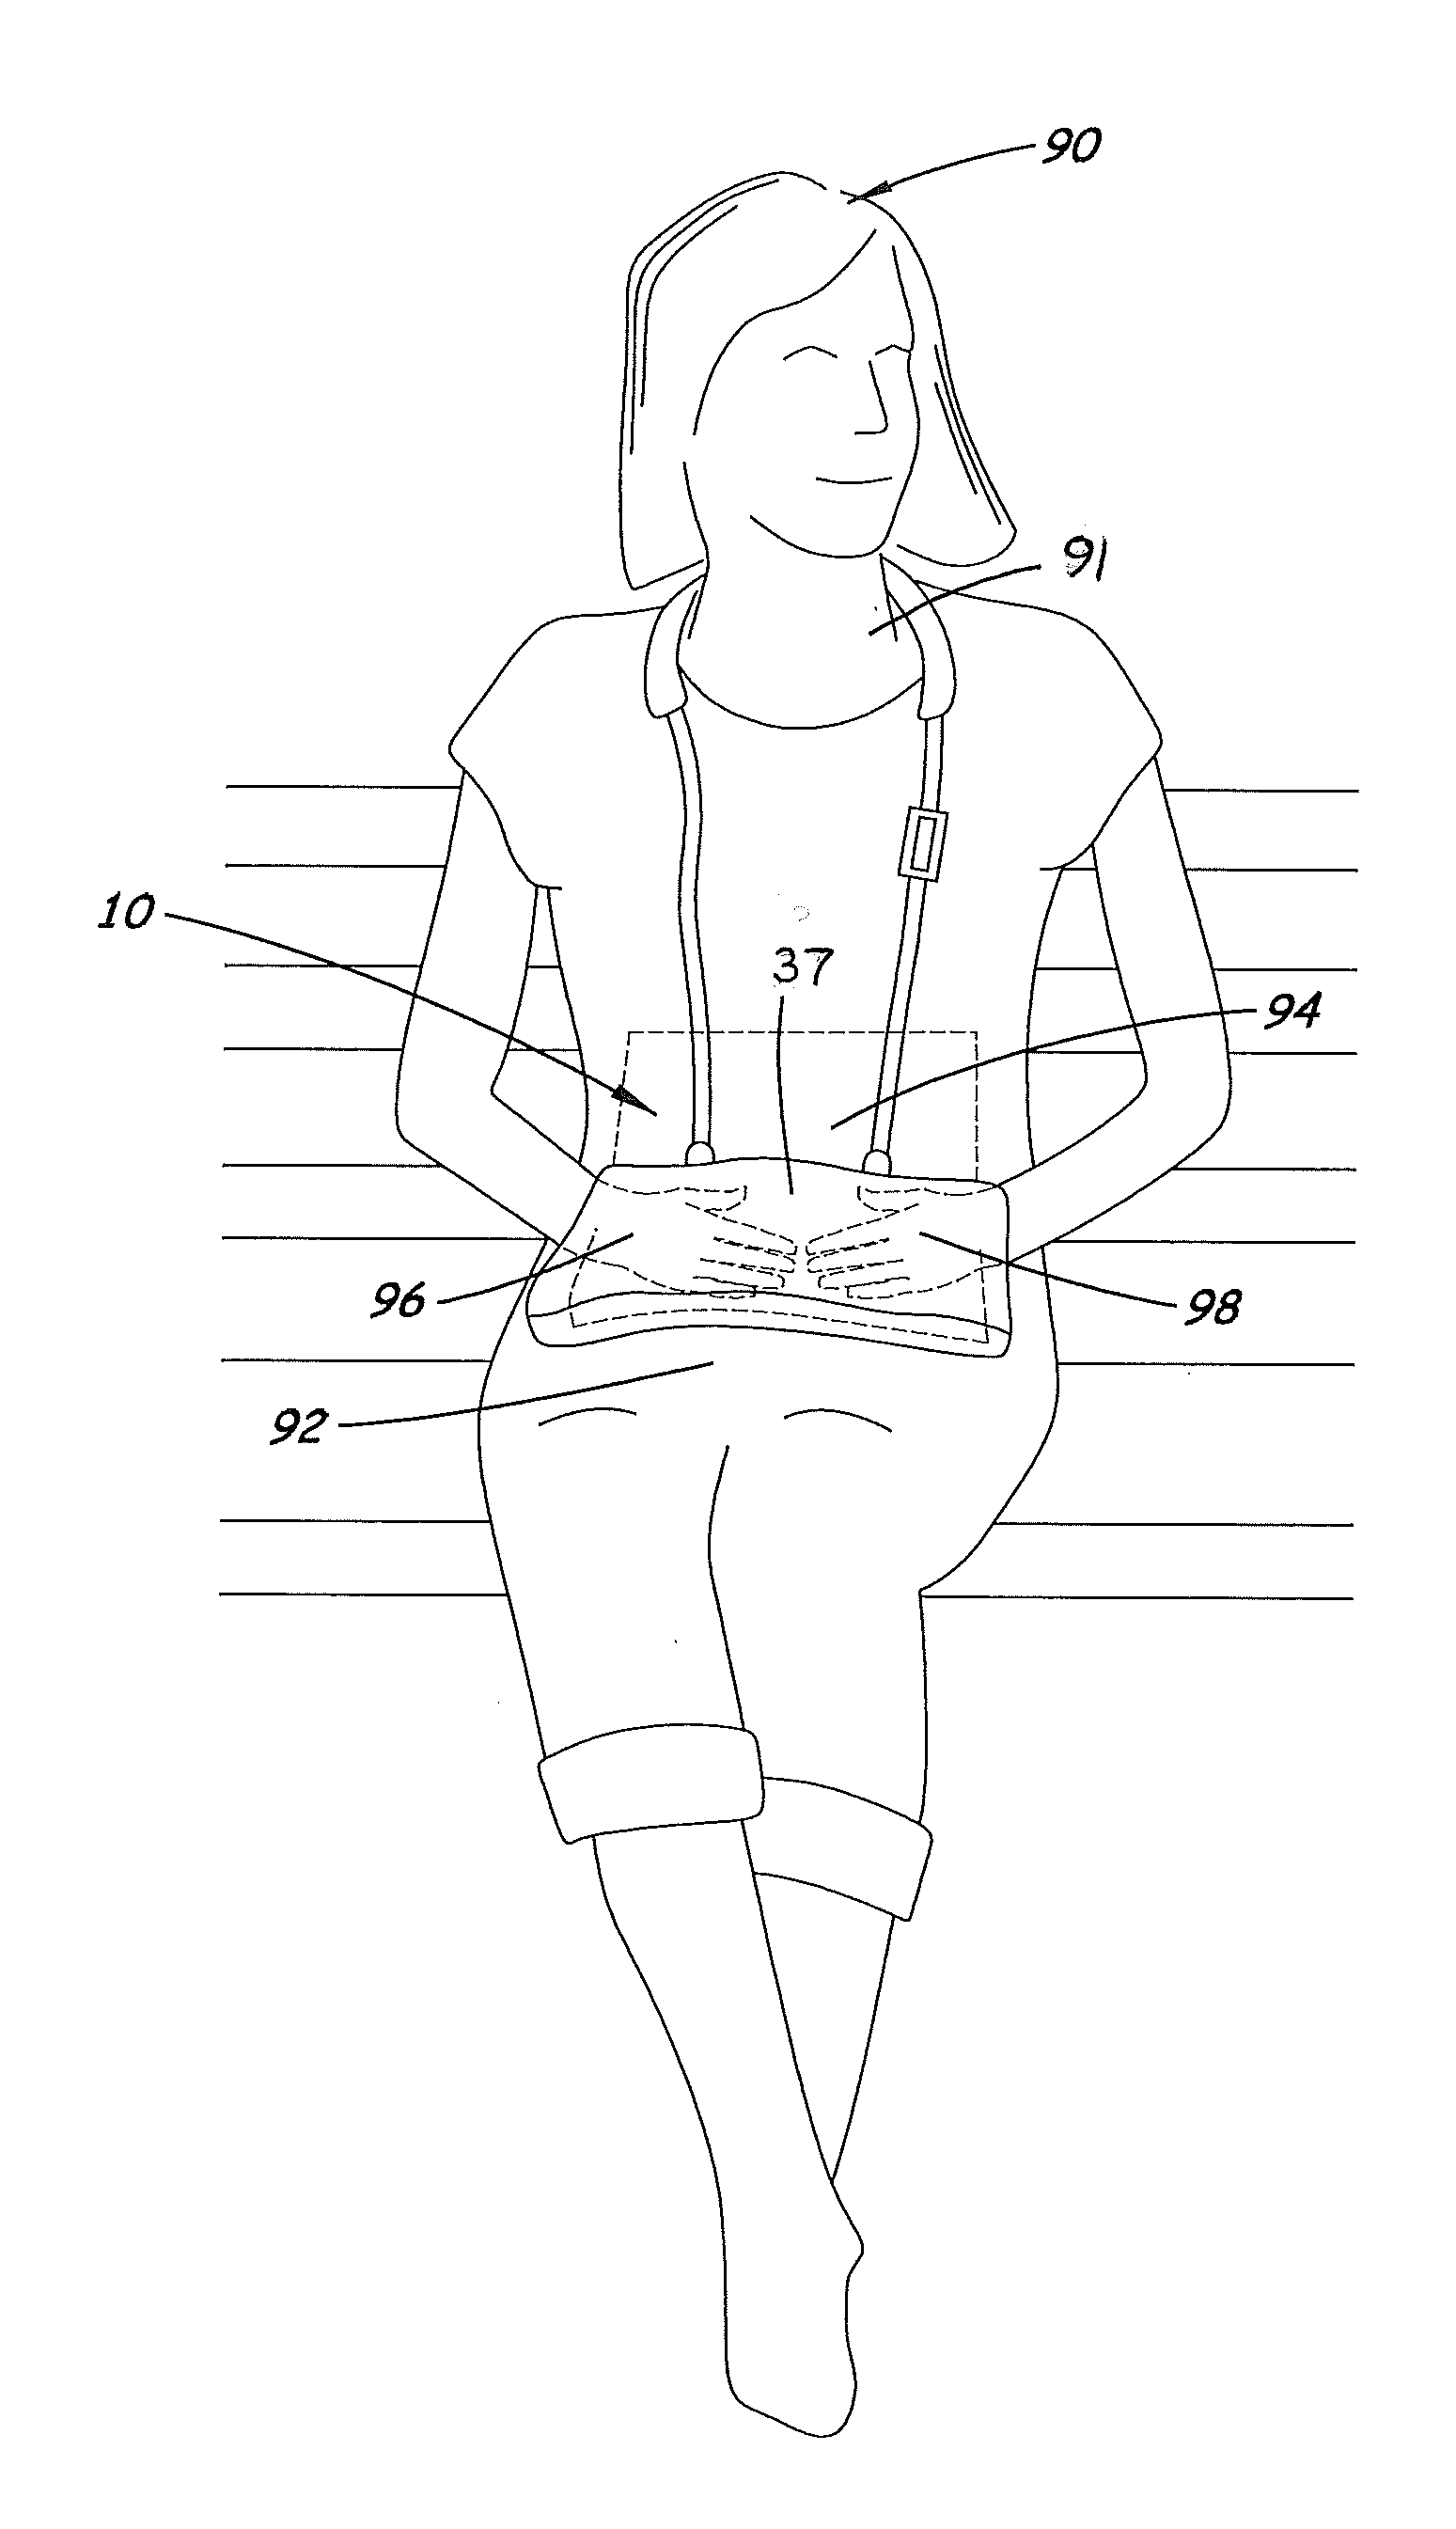 Long-Acting Combination Lap, Body and Dual Hand Warmer